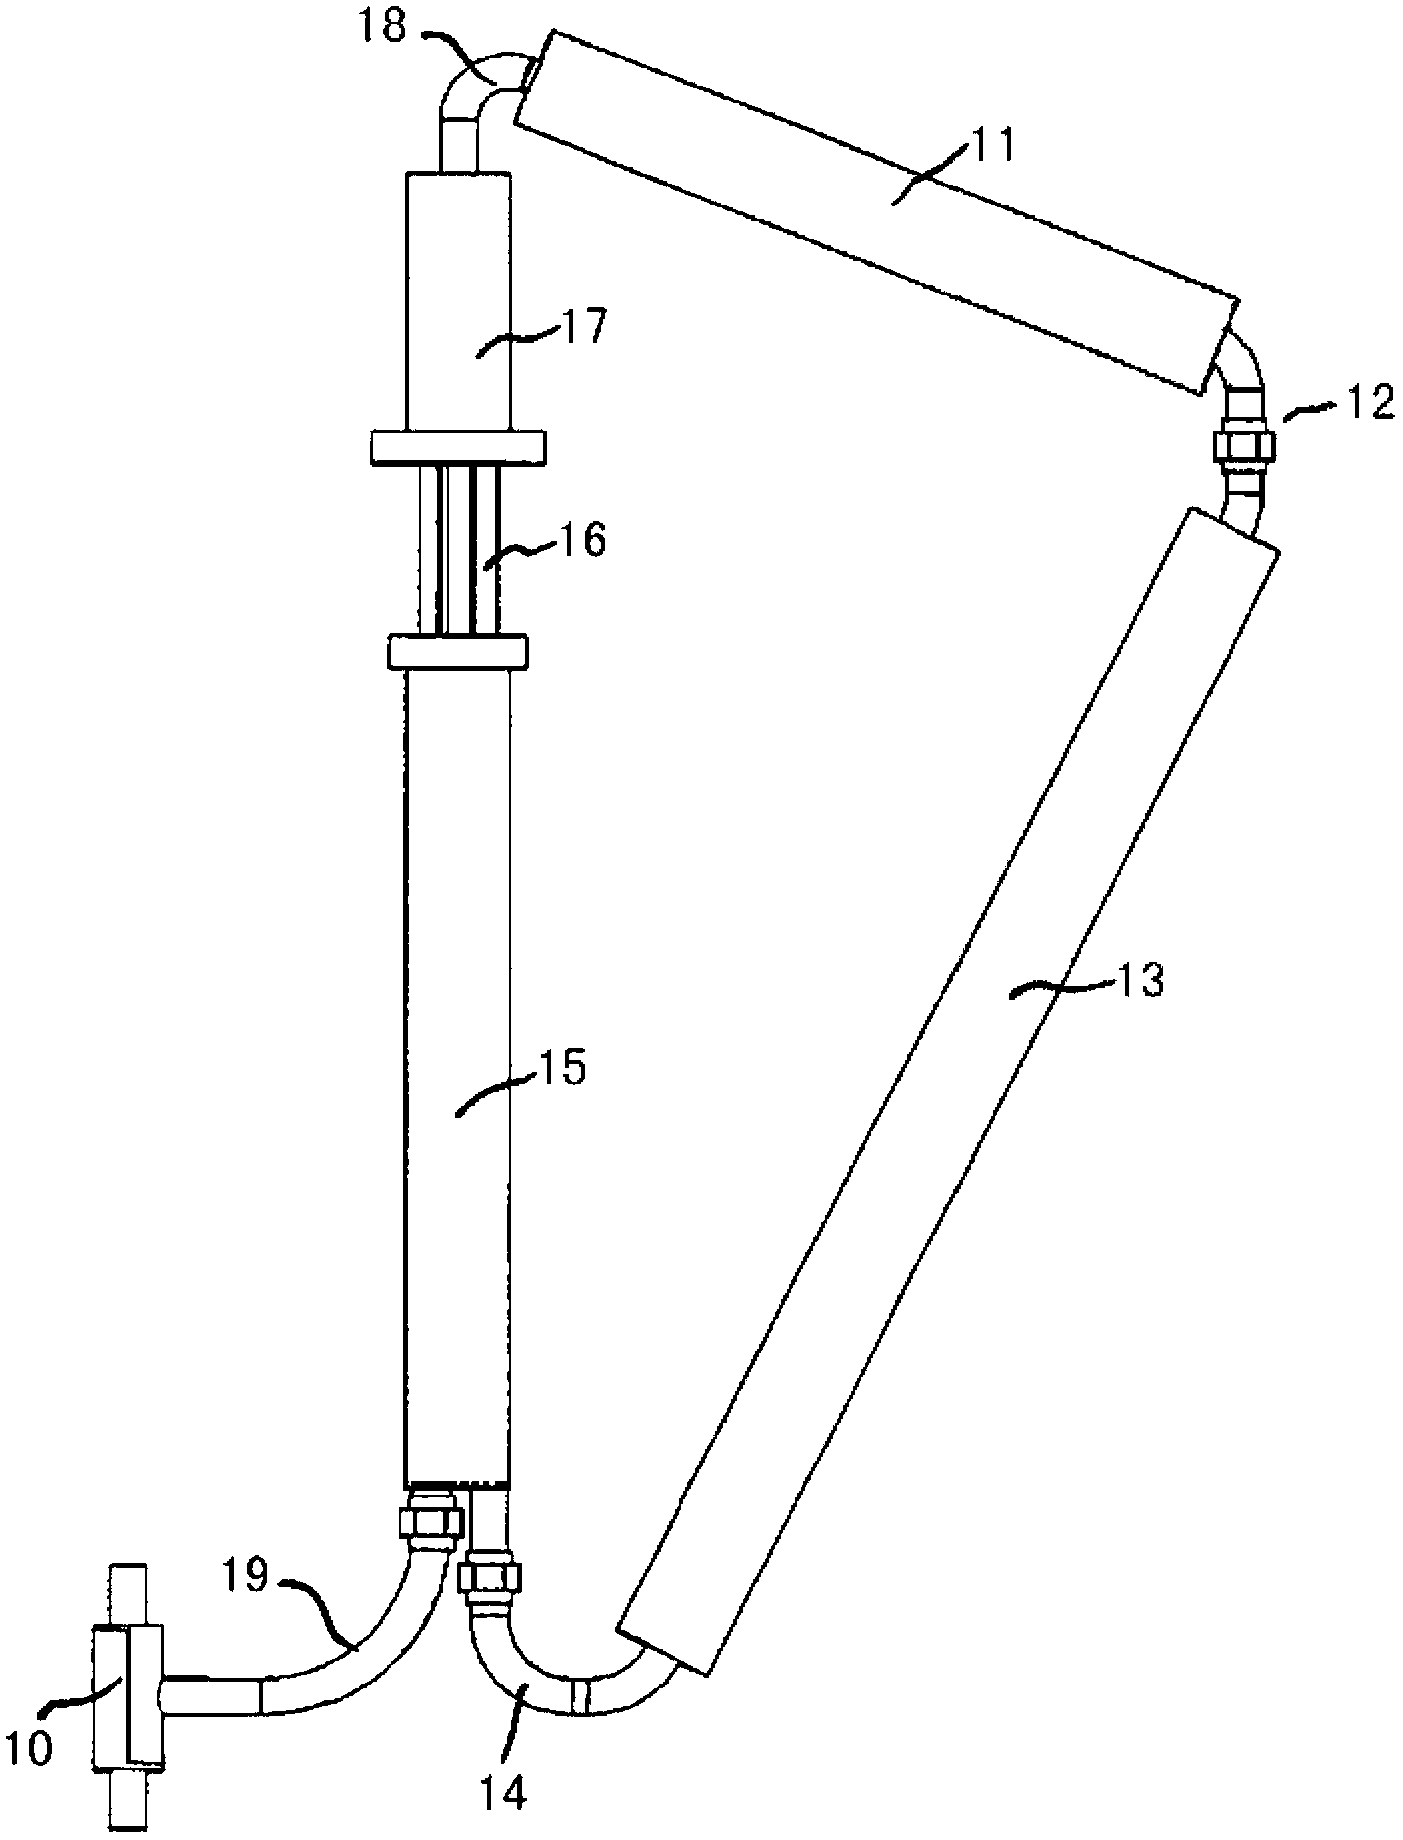 Boiler and liquid piston thermomotor thereof